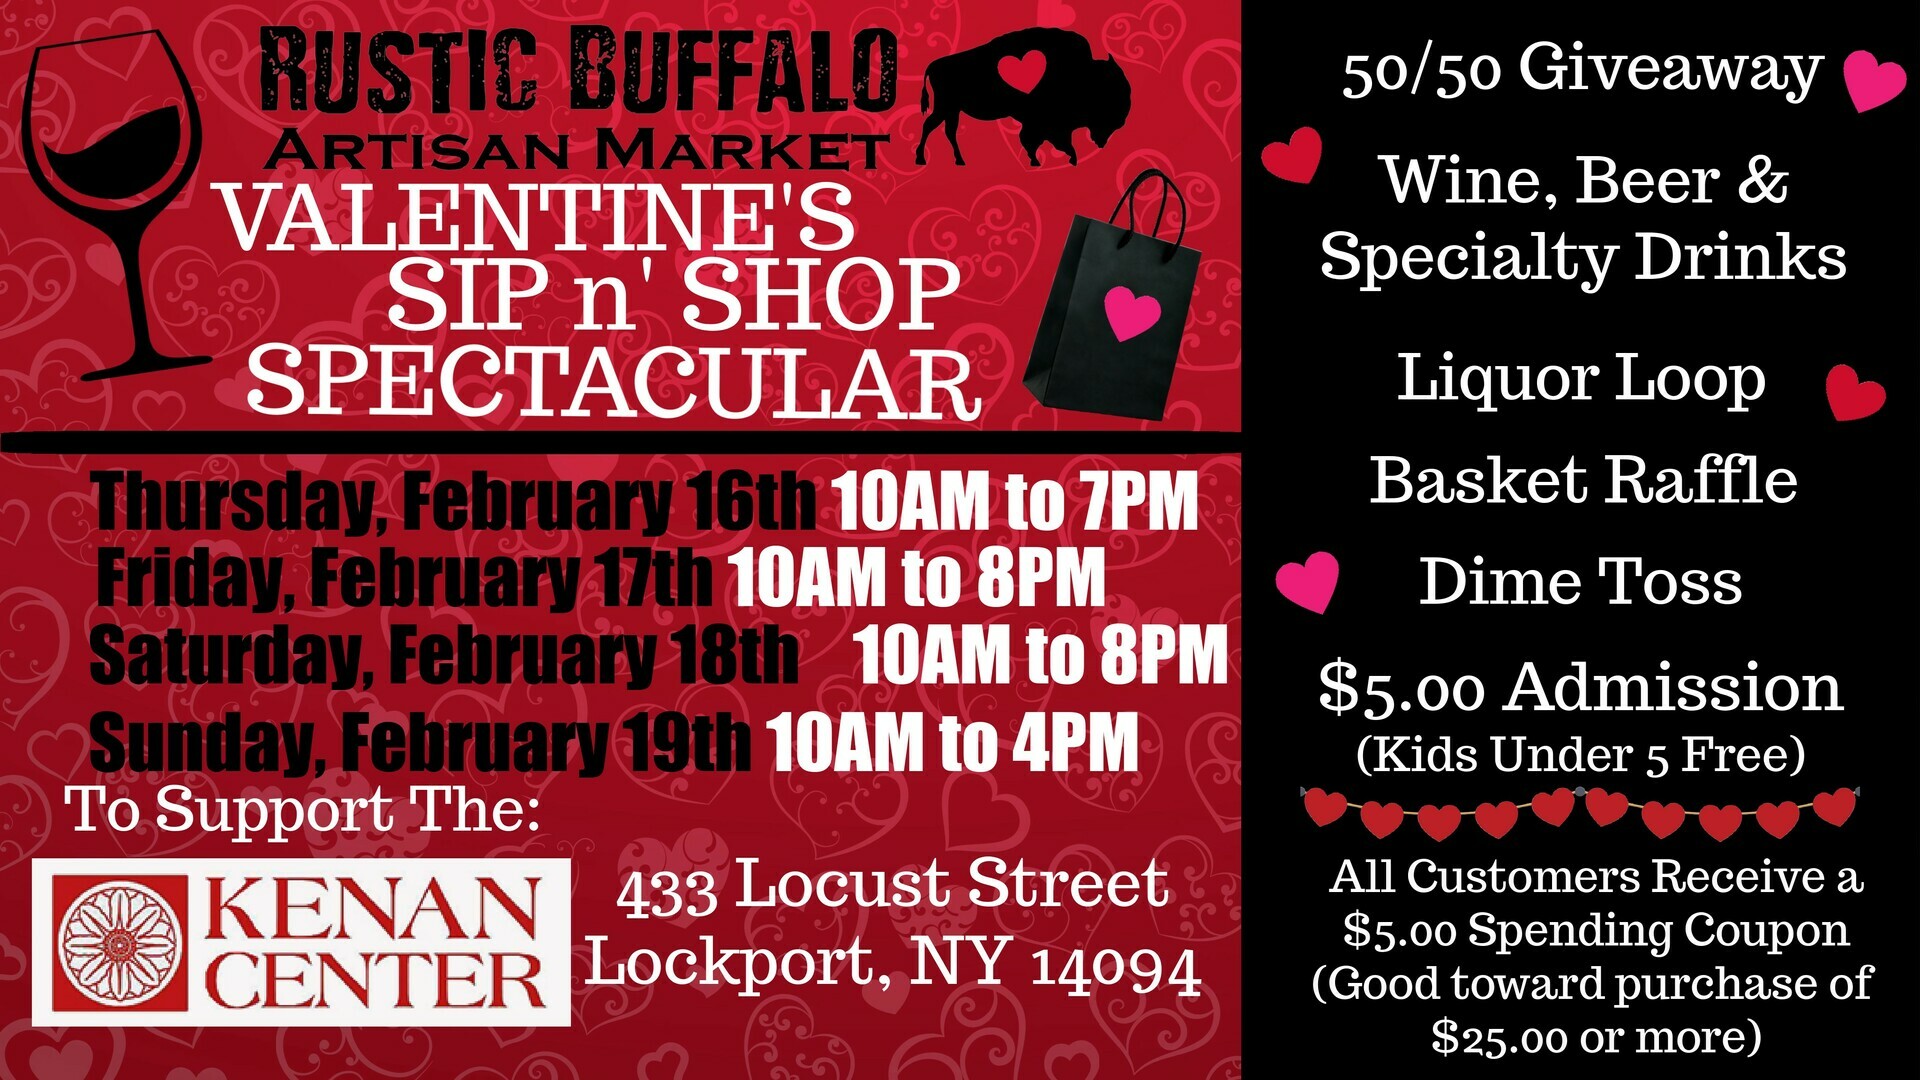 for Rustic Buffalo's Valentine Sip and Shop Spectacular!, Lockport, New York, United States